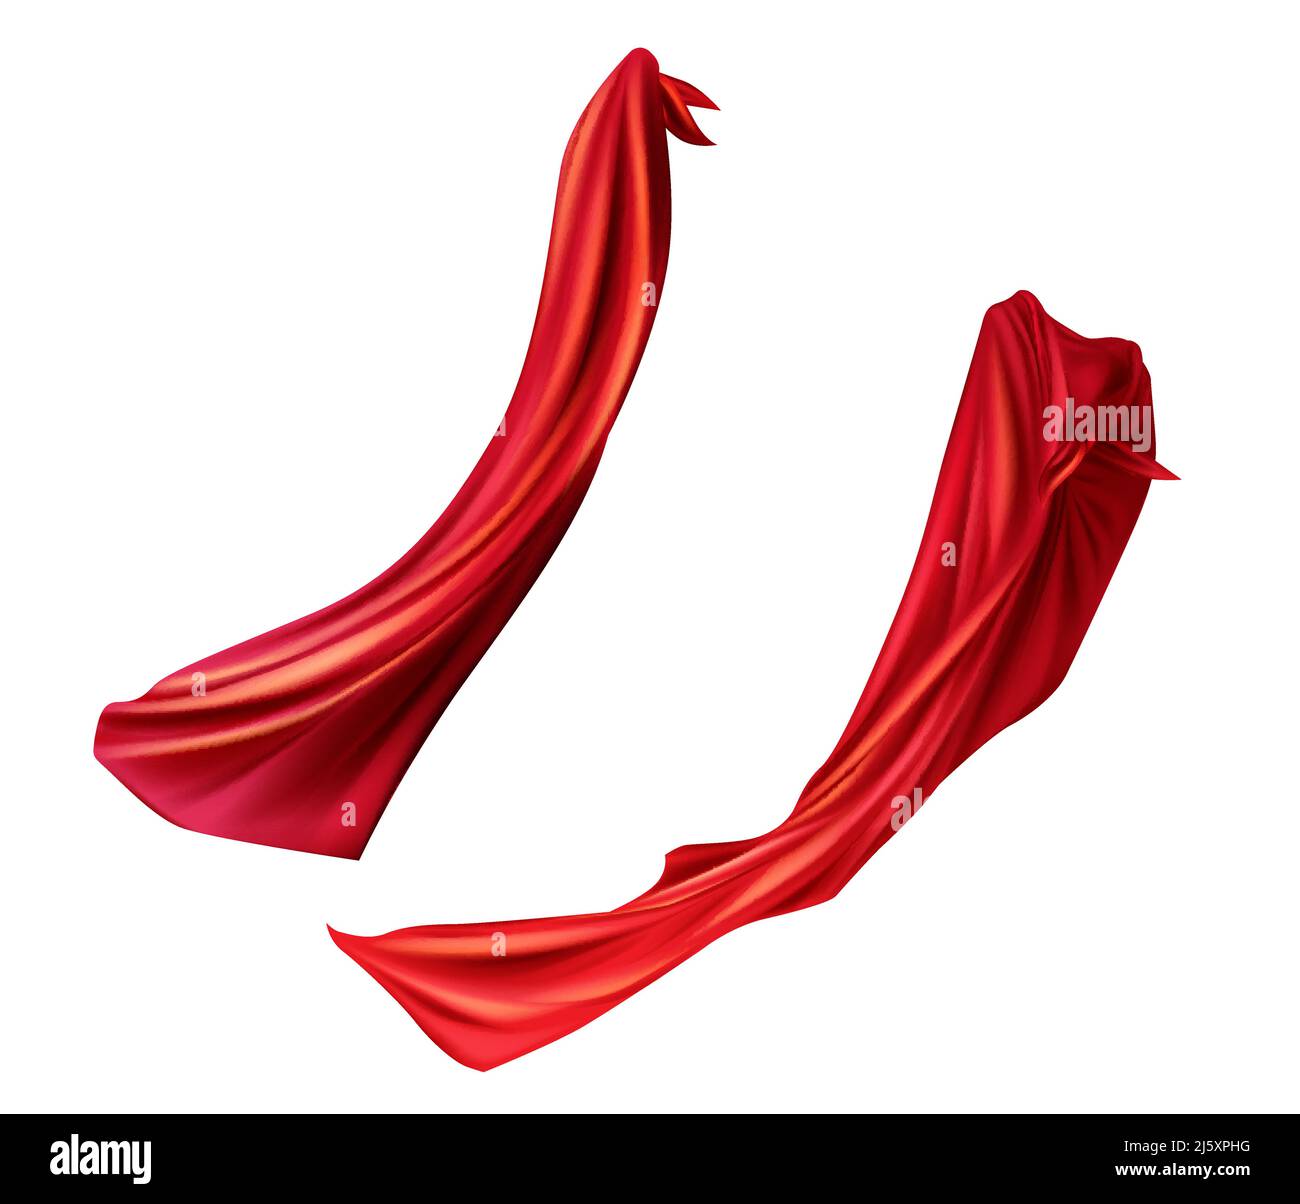 Red cloaks set. Silk flattering capes side view on different positions isolated on white background. Carnival, masquerade dress, superhero costume des Stock Vector